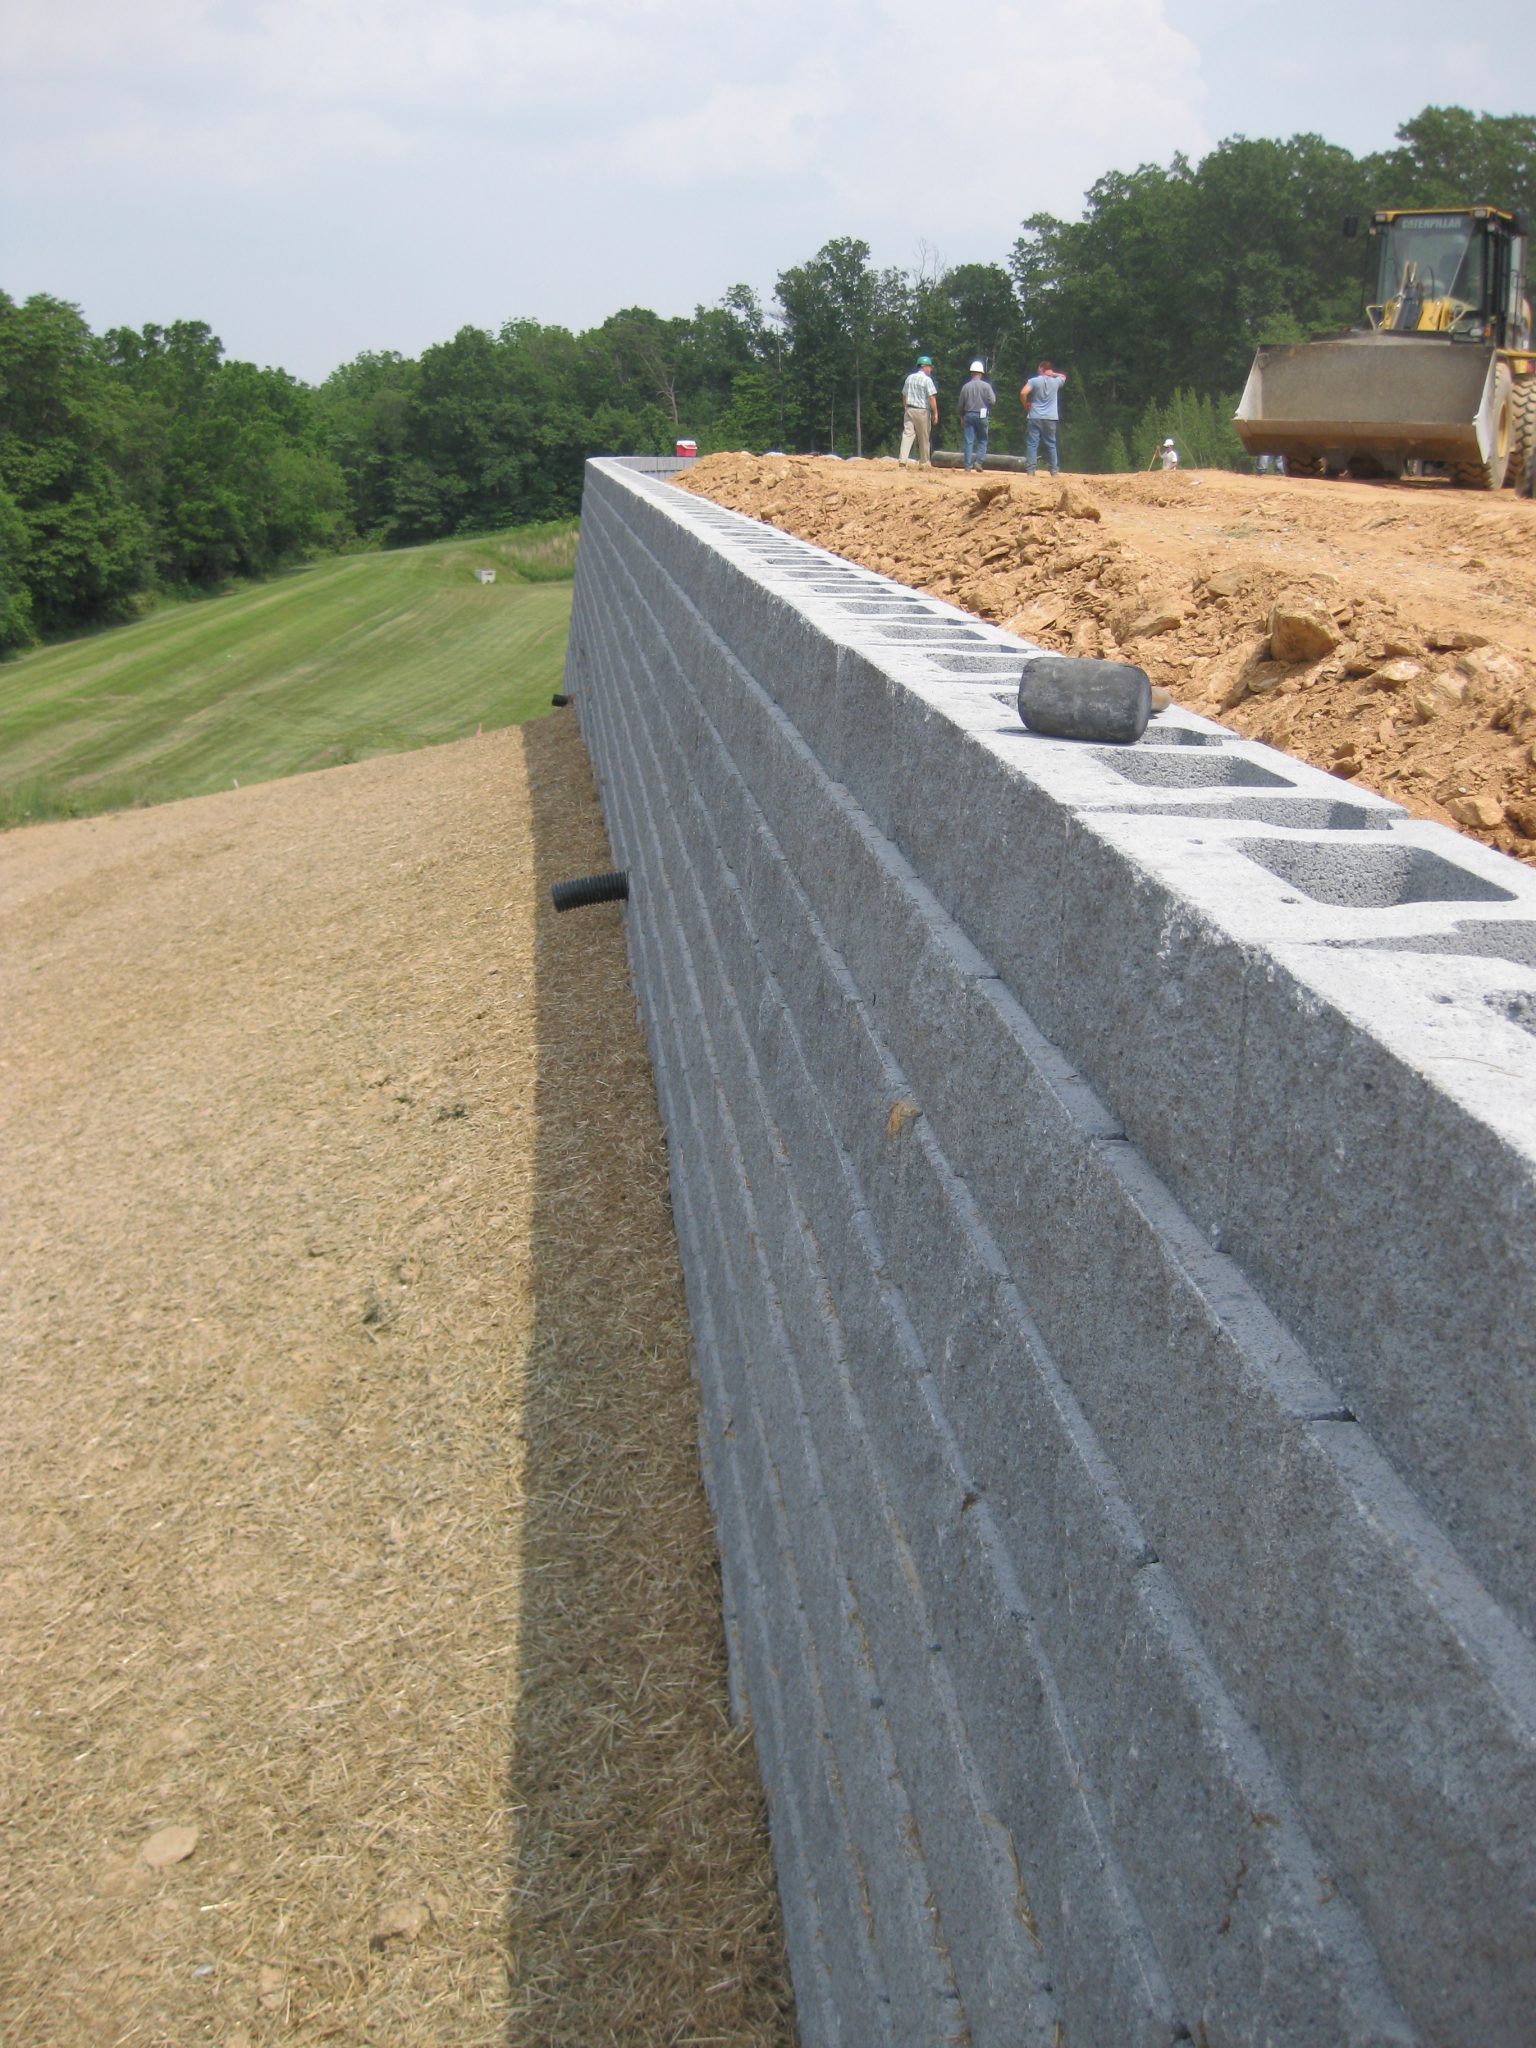 CornerStone 100 retaining walls can withstand major loads and pressures.